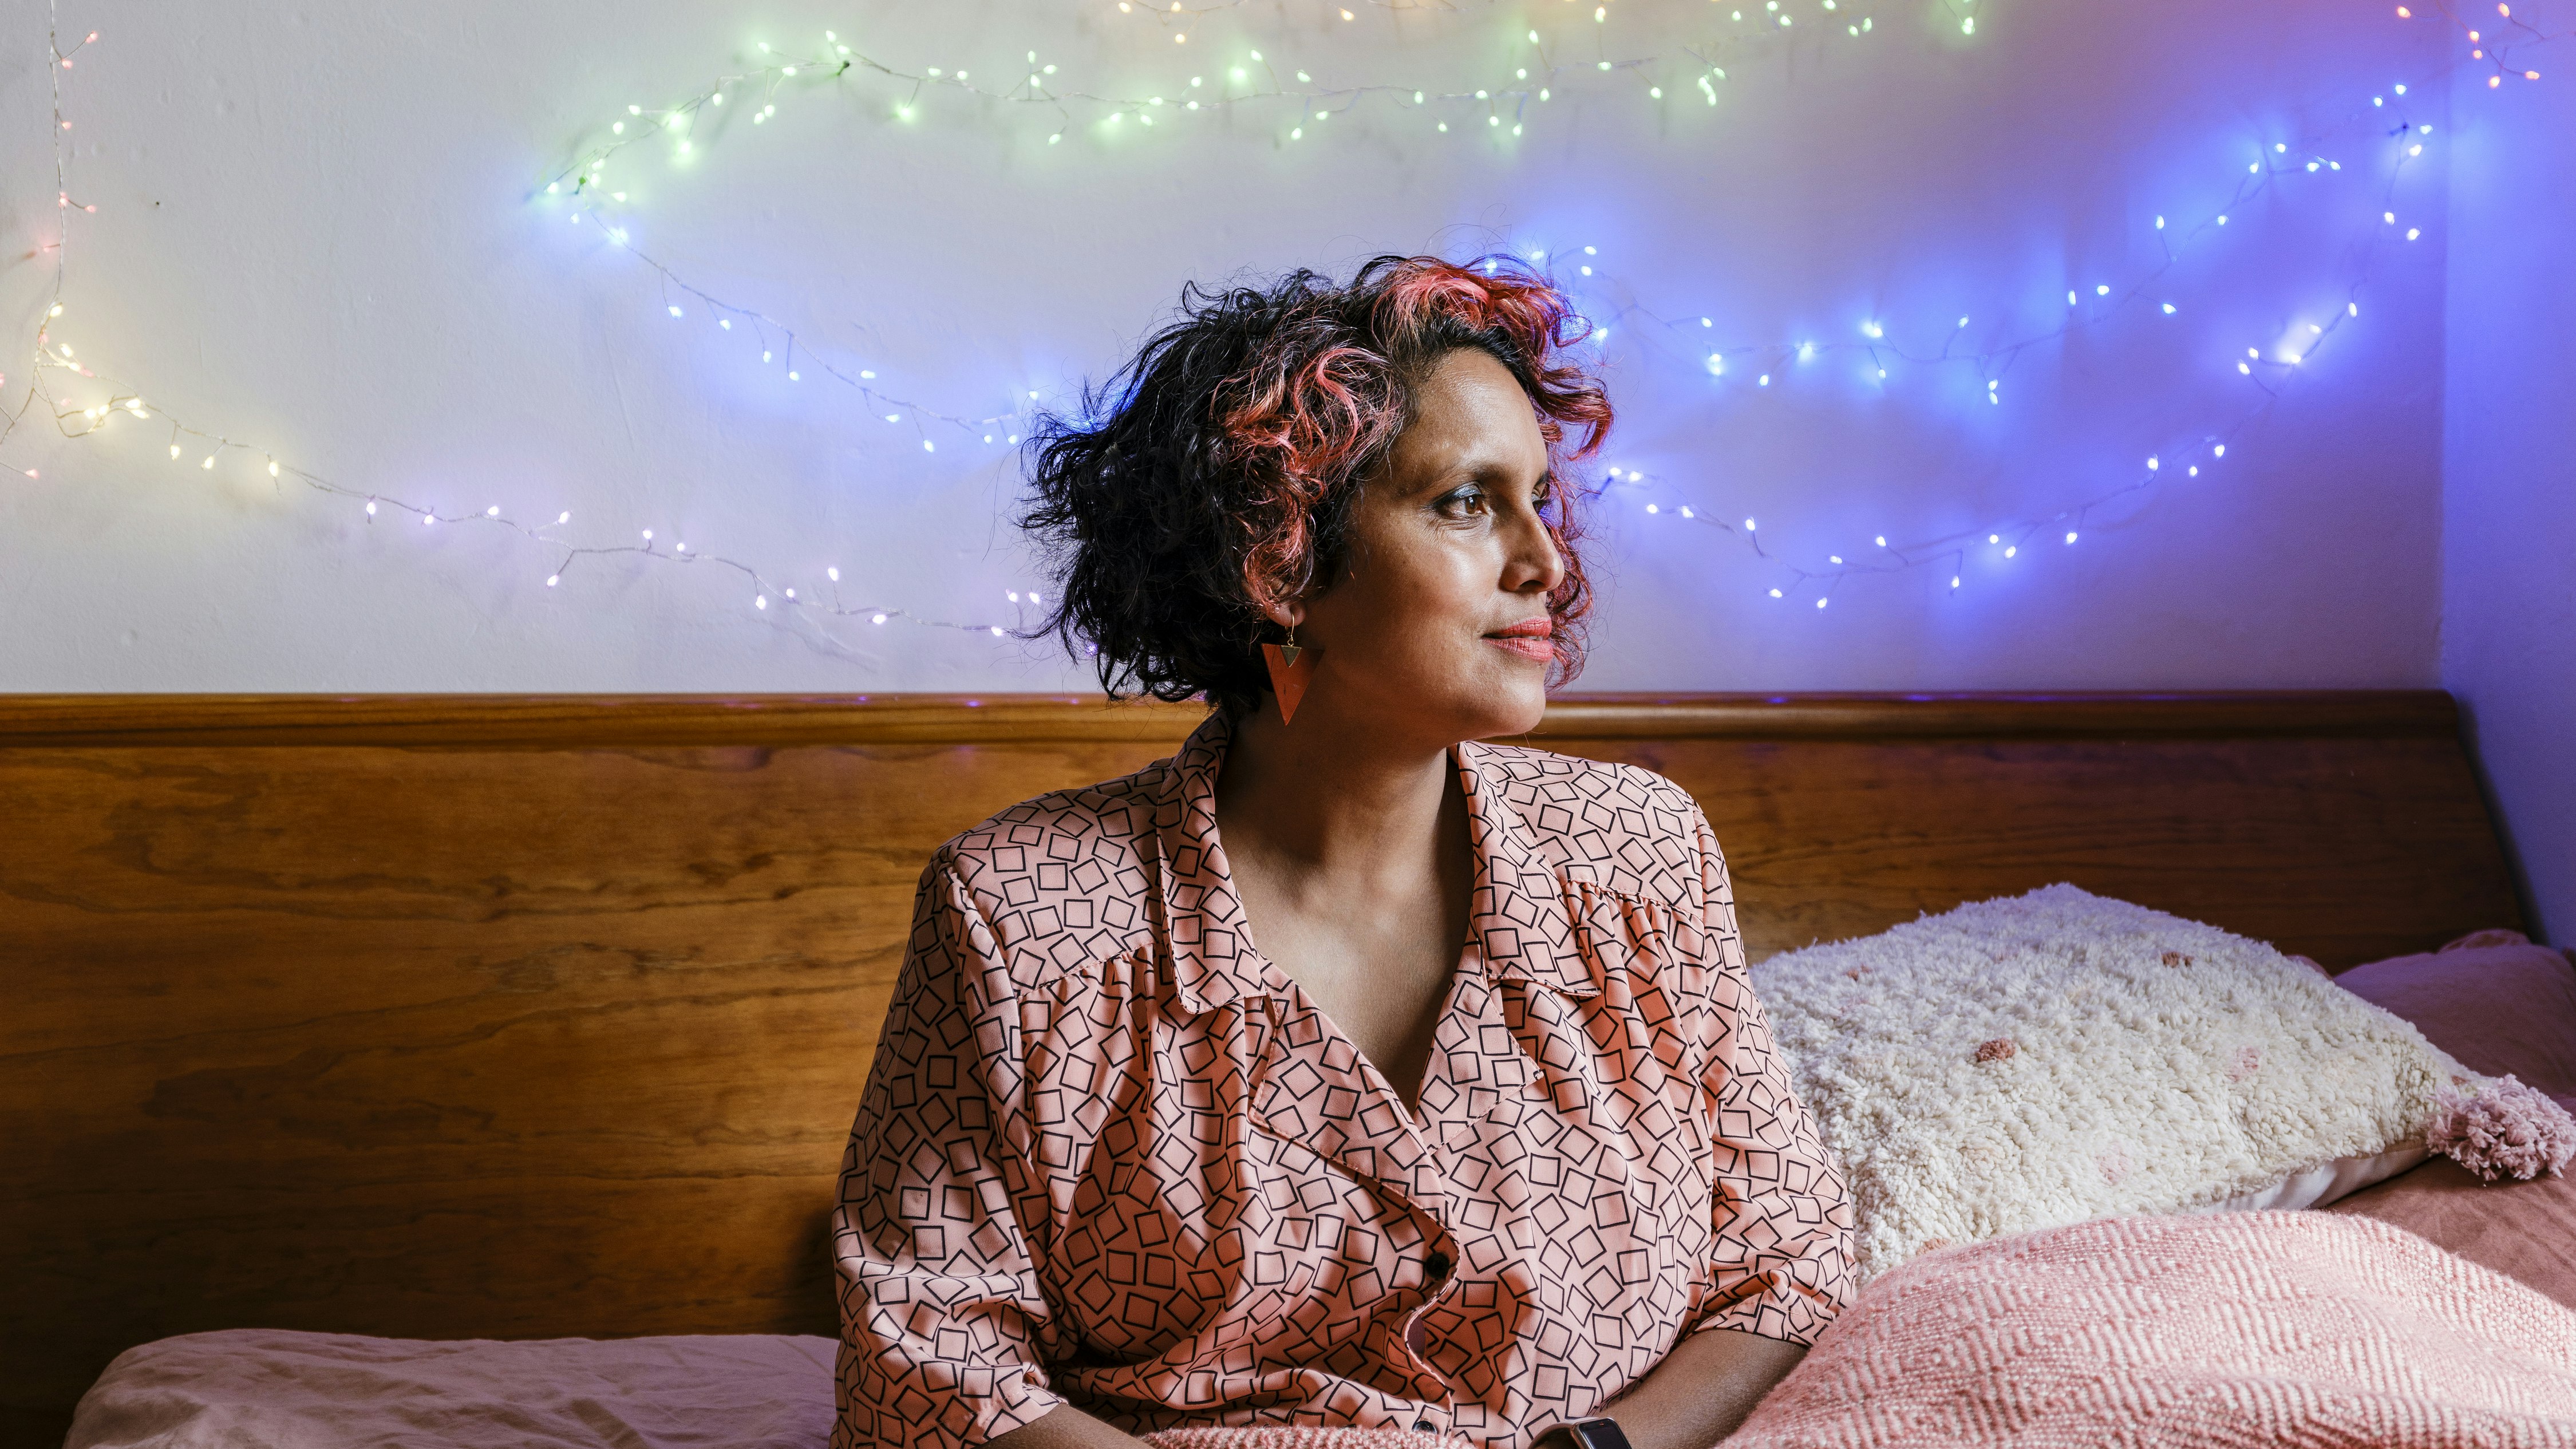 ID: daylight photo of a light-medium brown medium bodied person with coral, red and black hair, red drop earrings and lipstick and a coral shirt with thin black squares, sits in a peach blanketed bed with wooden headboard. Their face is in profile looking towards the light and delicate rainbow fairy lights are on the cream-coloured wall behind the bed.